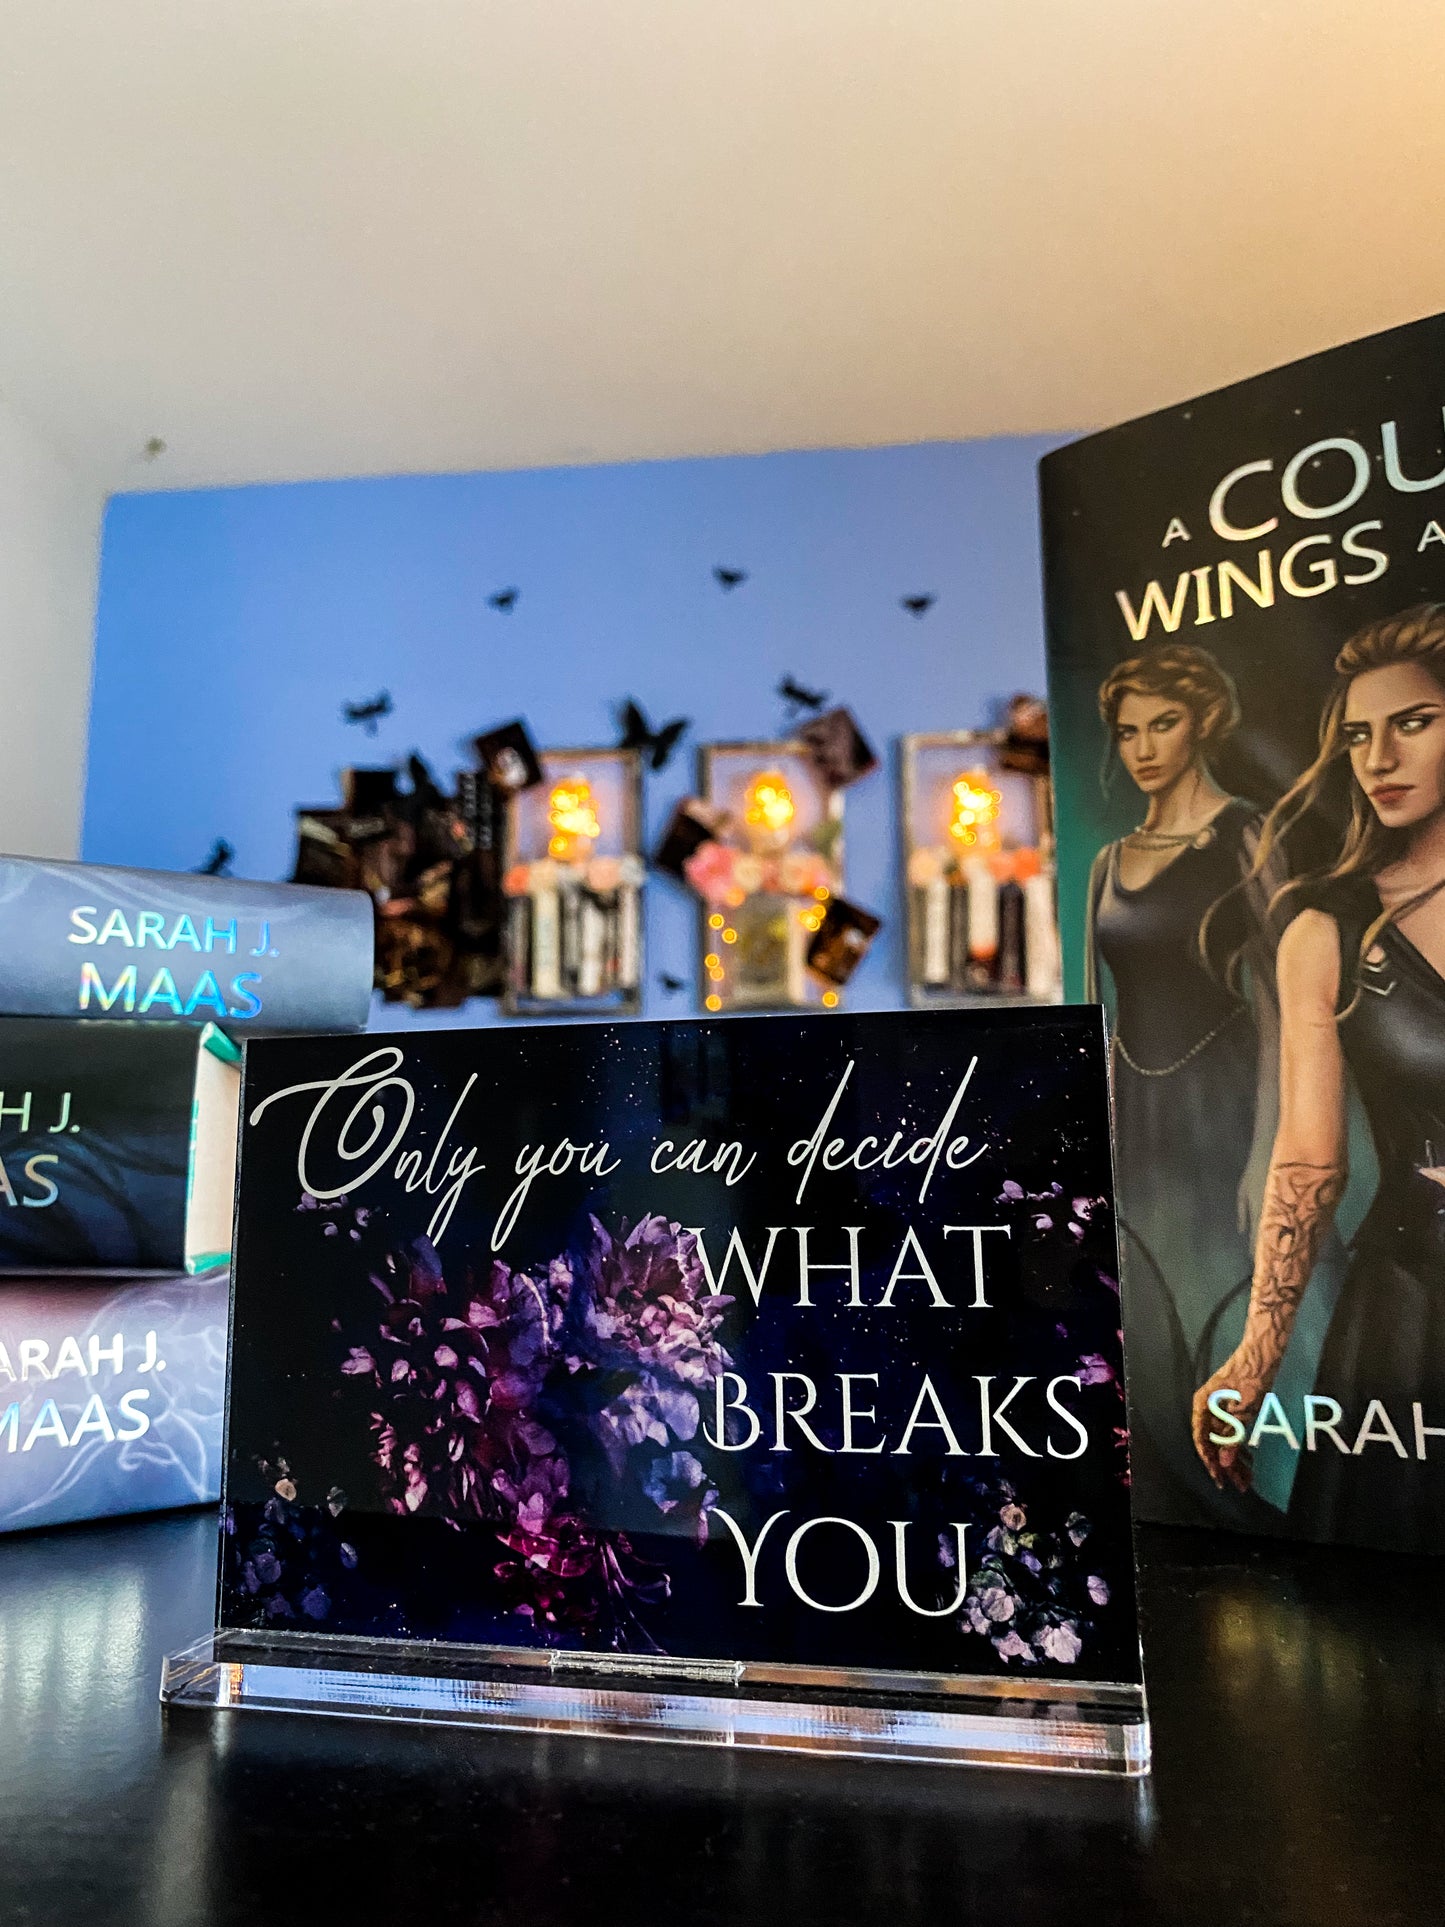 "Only you decide what breaks you." - A Court of Thorns and Roses Series / A Court of Wings and Ruin - Freestanding Bookshelf / Desktop Acrylic Accessory - Officially licensed by Sarah J. Maas - D4